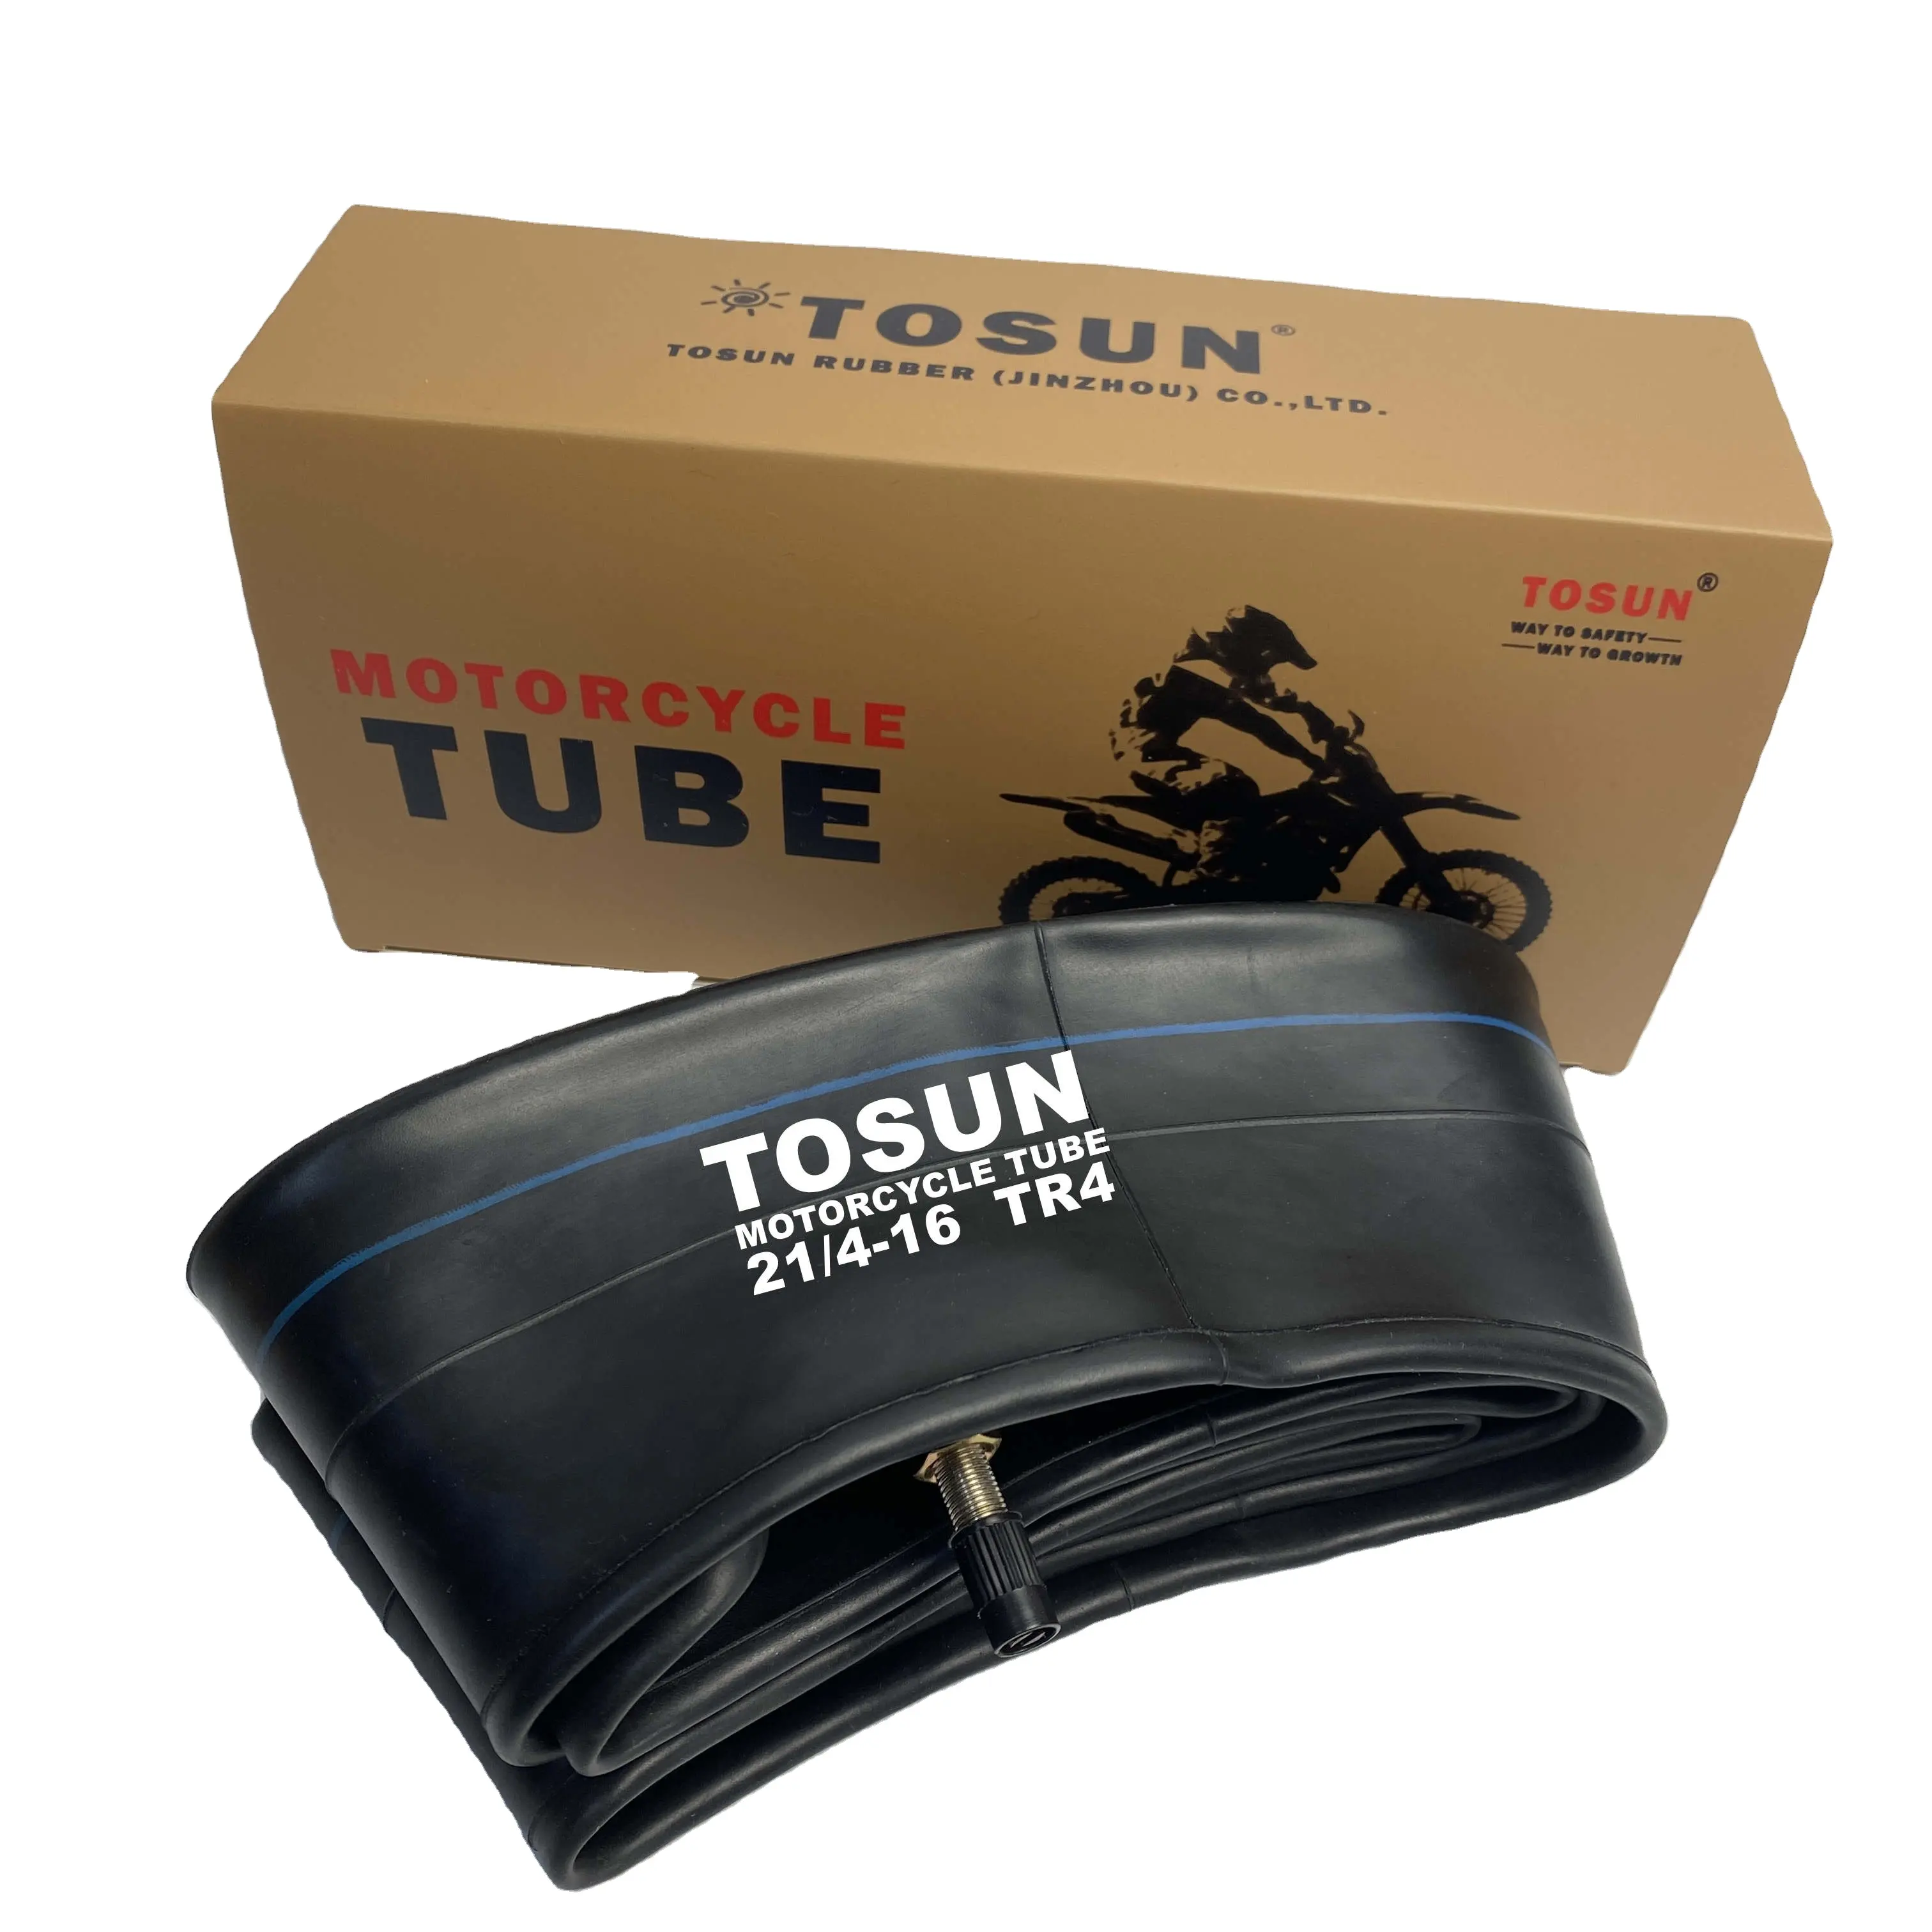 factory wholesale 21/4-16 2.00-16 TR4 motorcycle motorbike natural butyl rubber inner tube